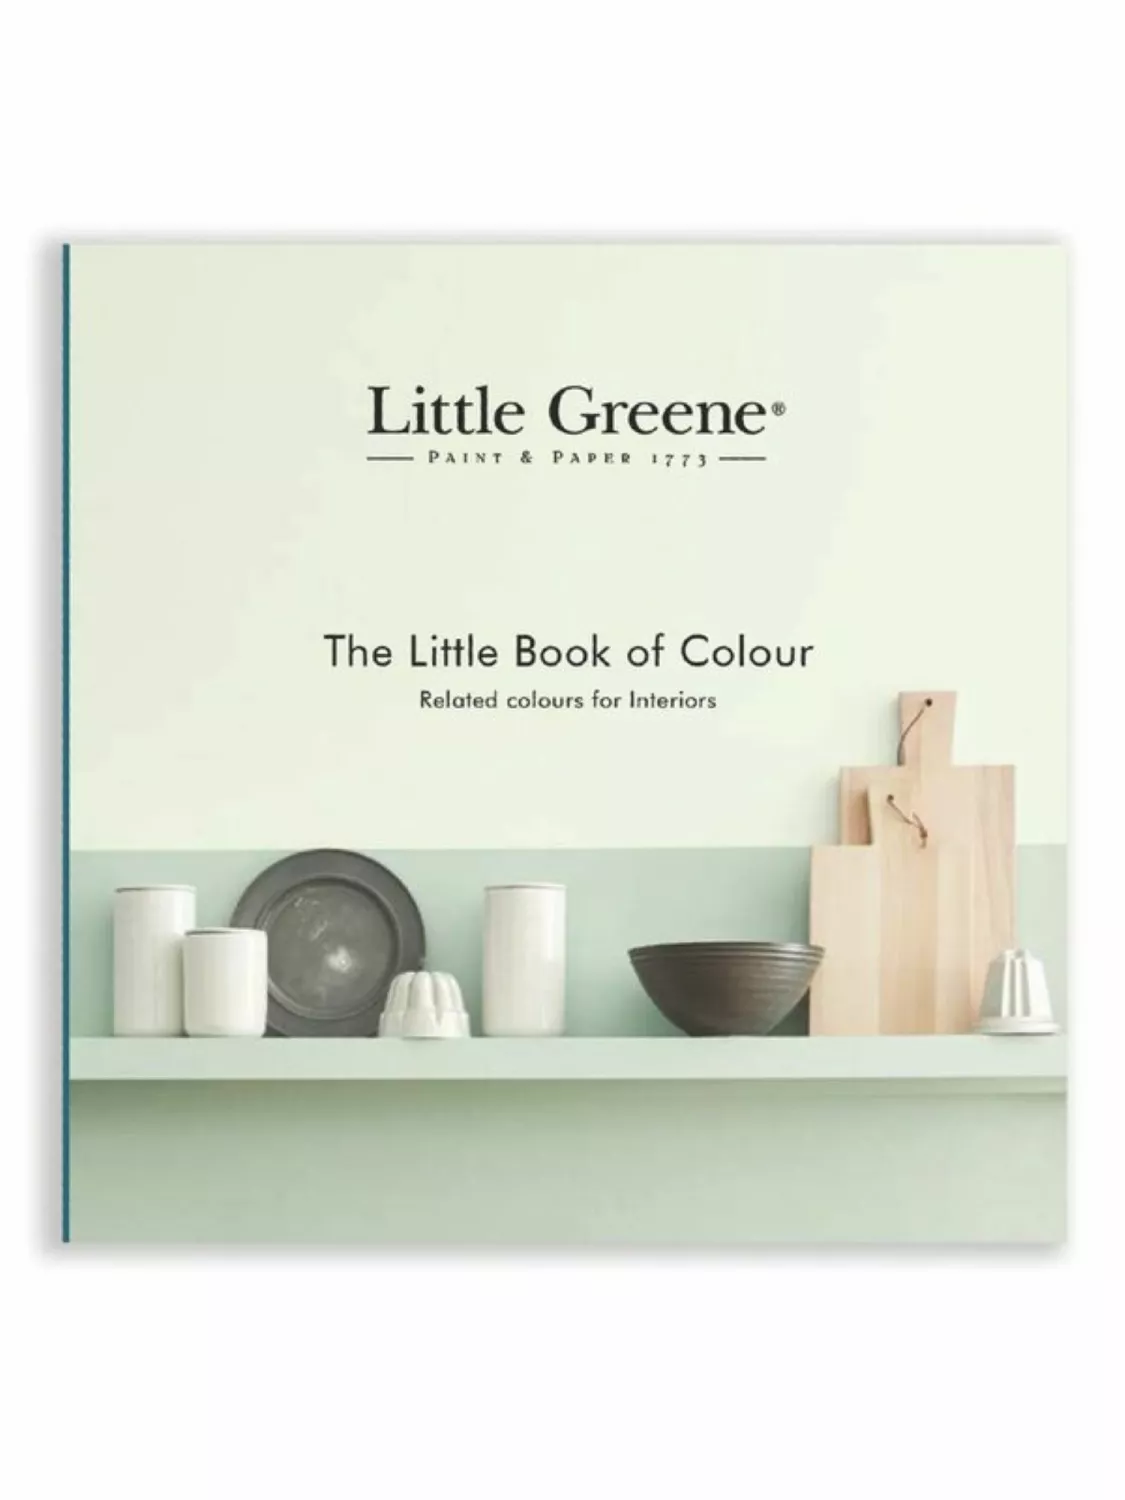 The Little Book of Colour